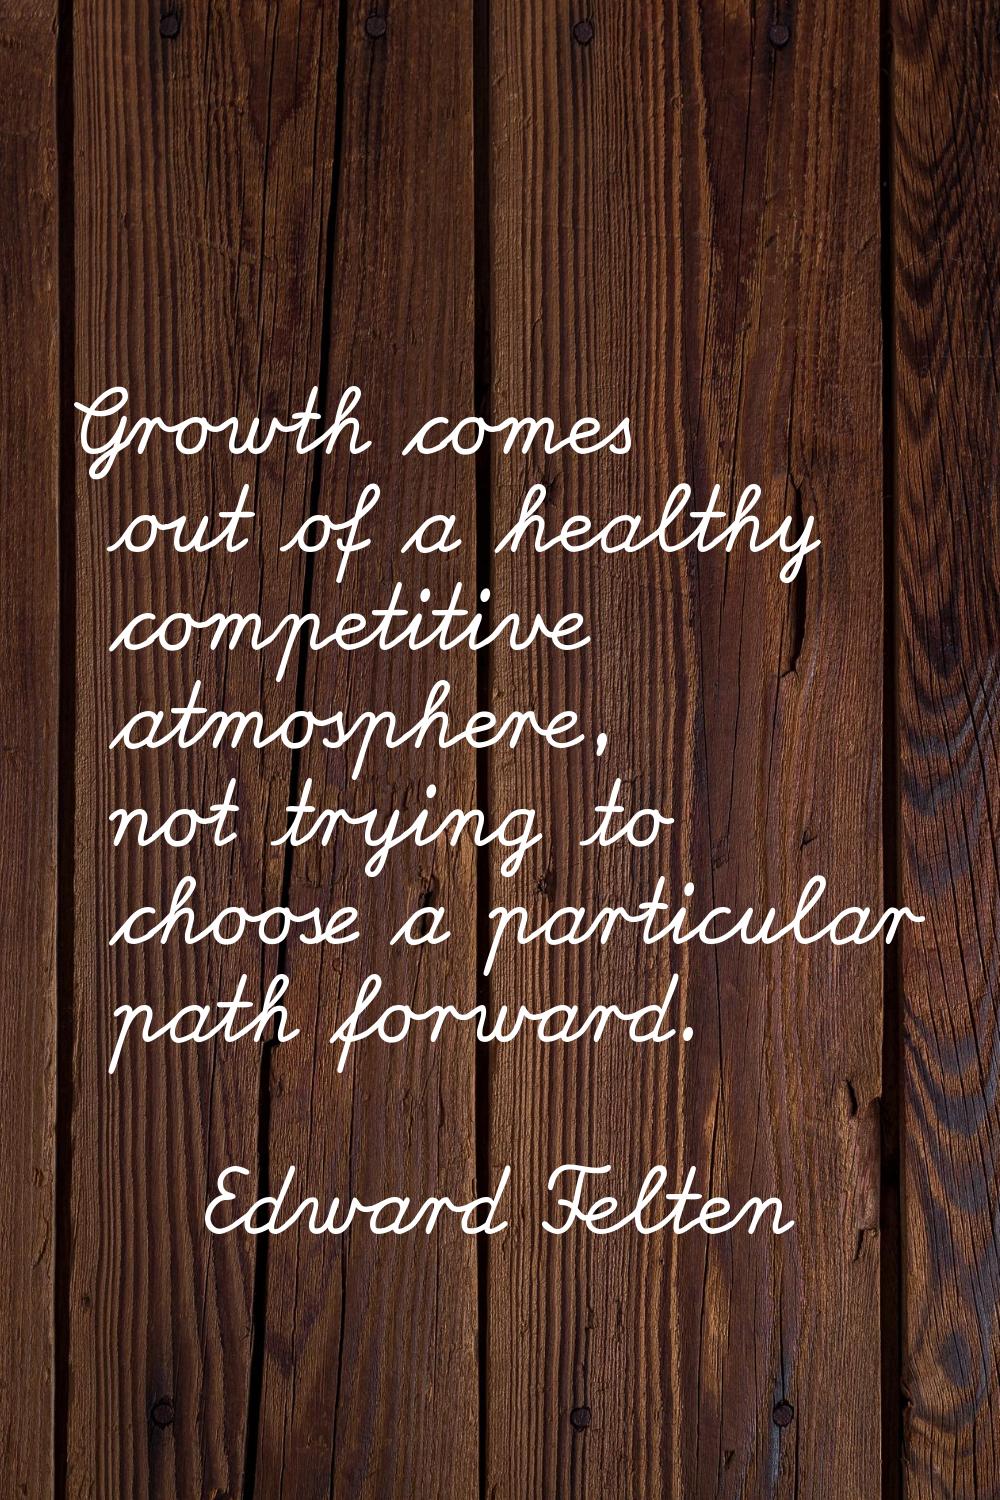 Growth comes out of a healthy competitive atmosphere, not trying to choose a particular path forwar